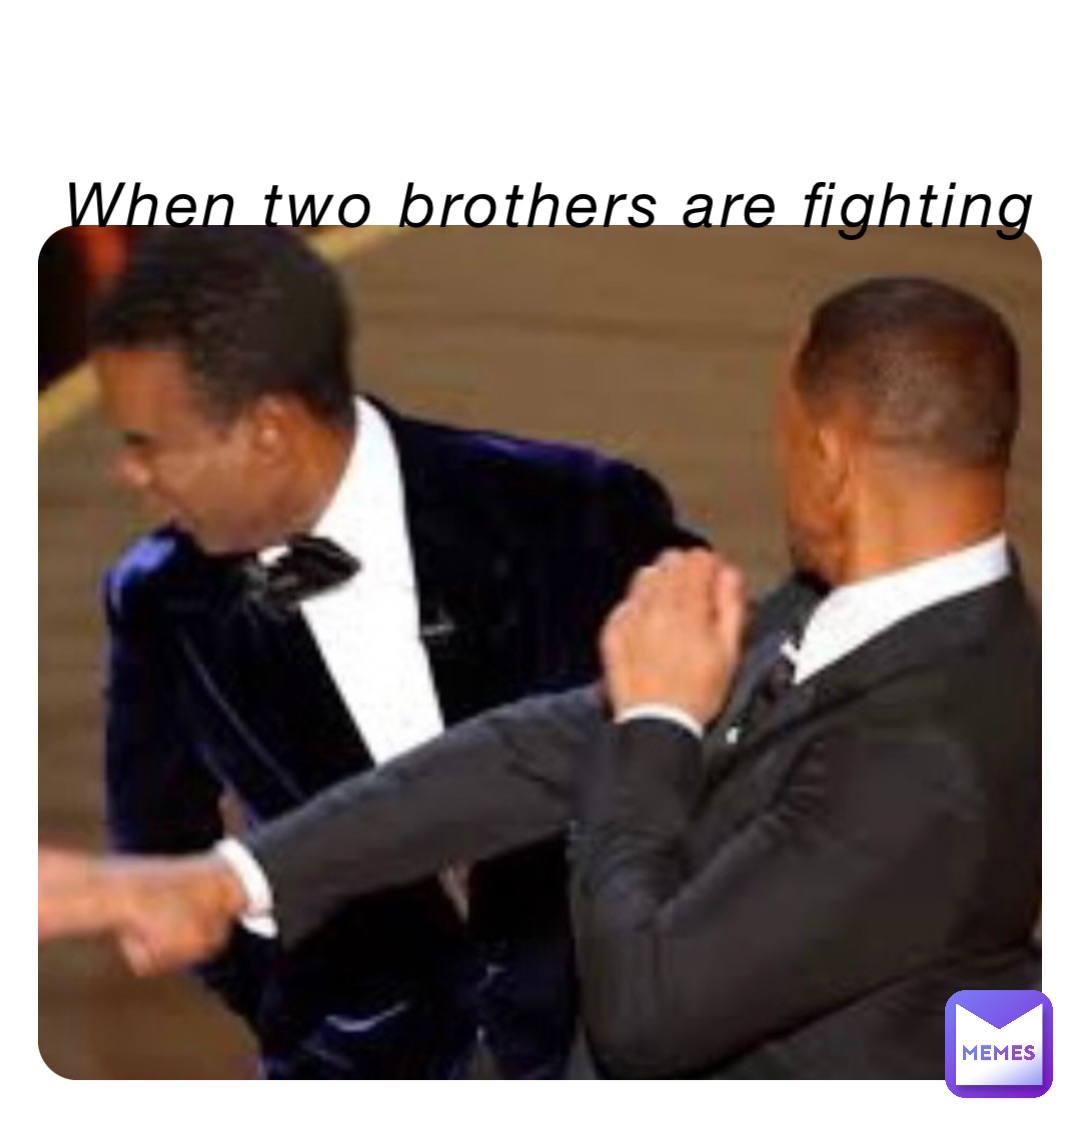 When two brothers are fighting